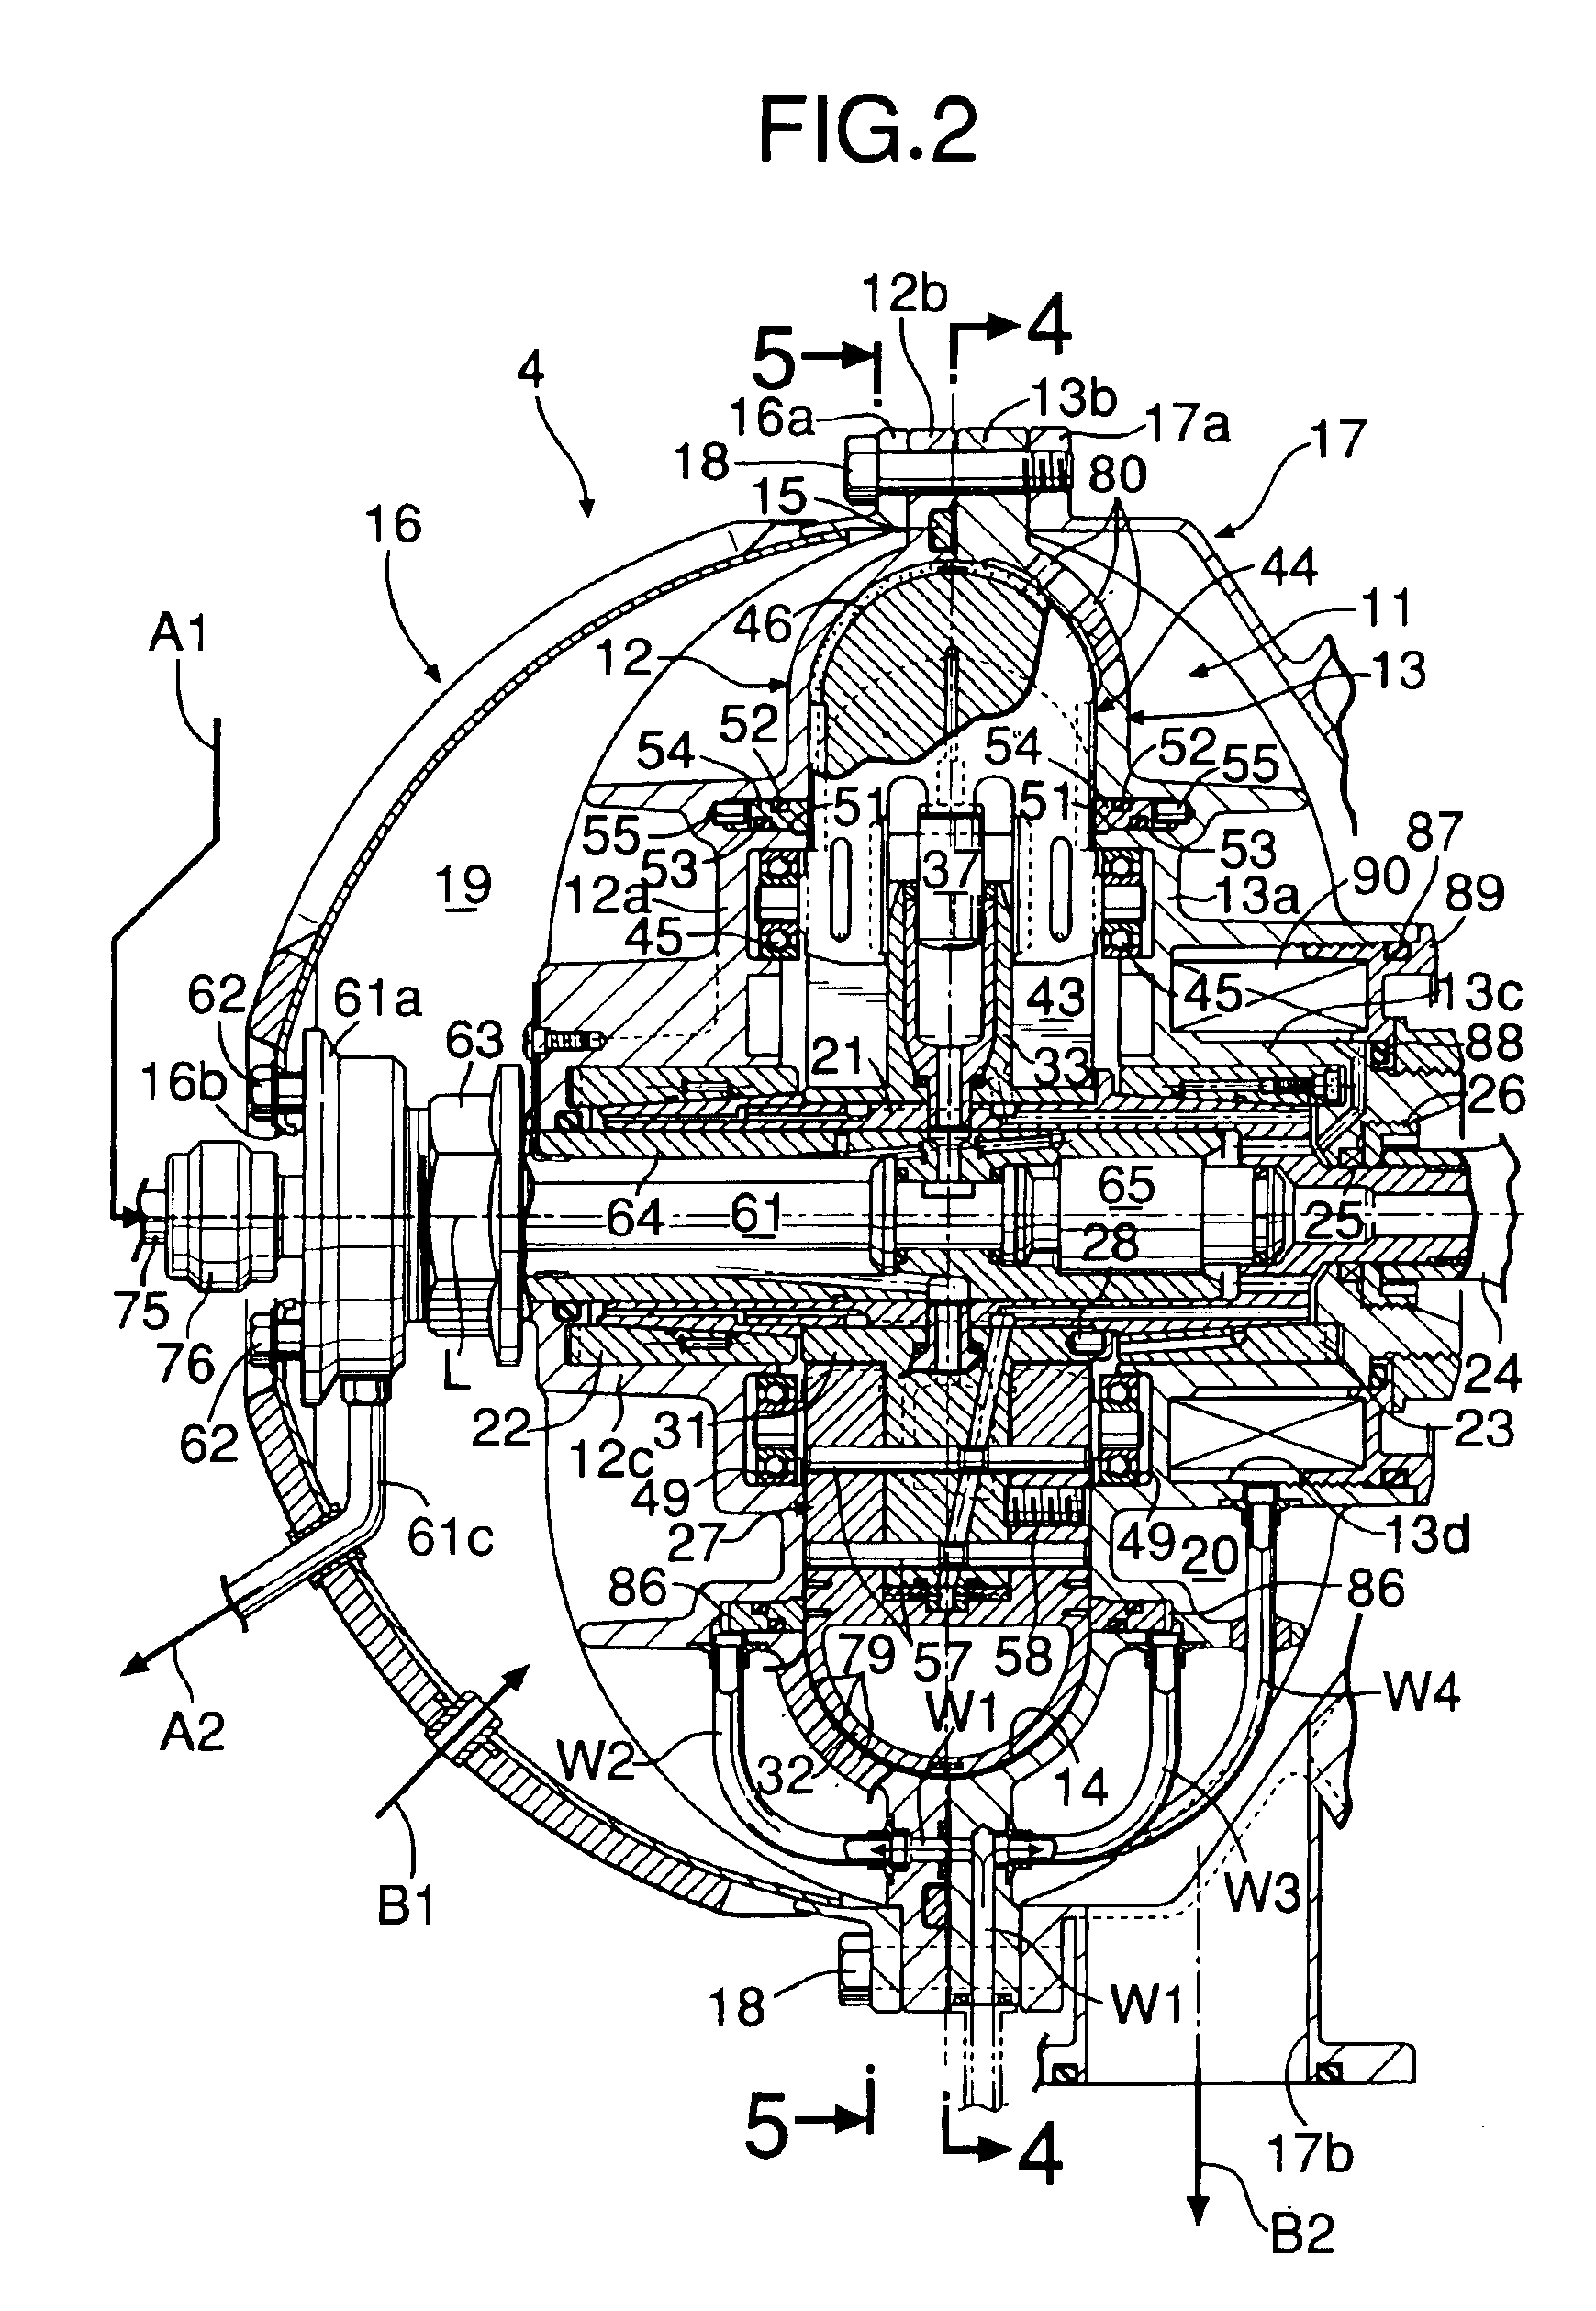 Rankine cycle device of internal combustion engine